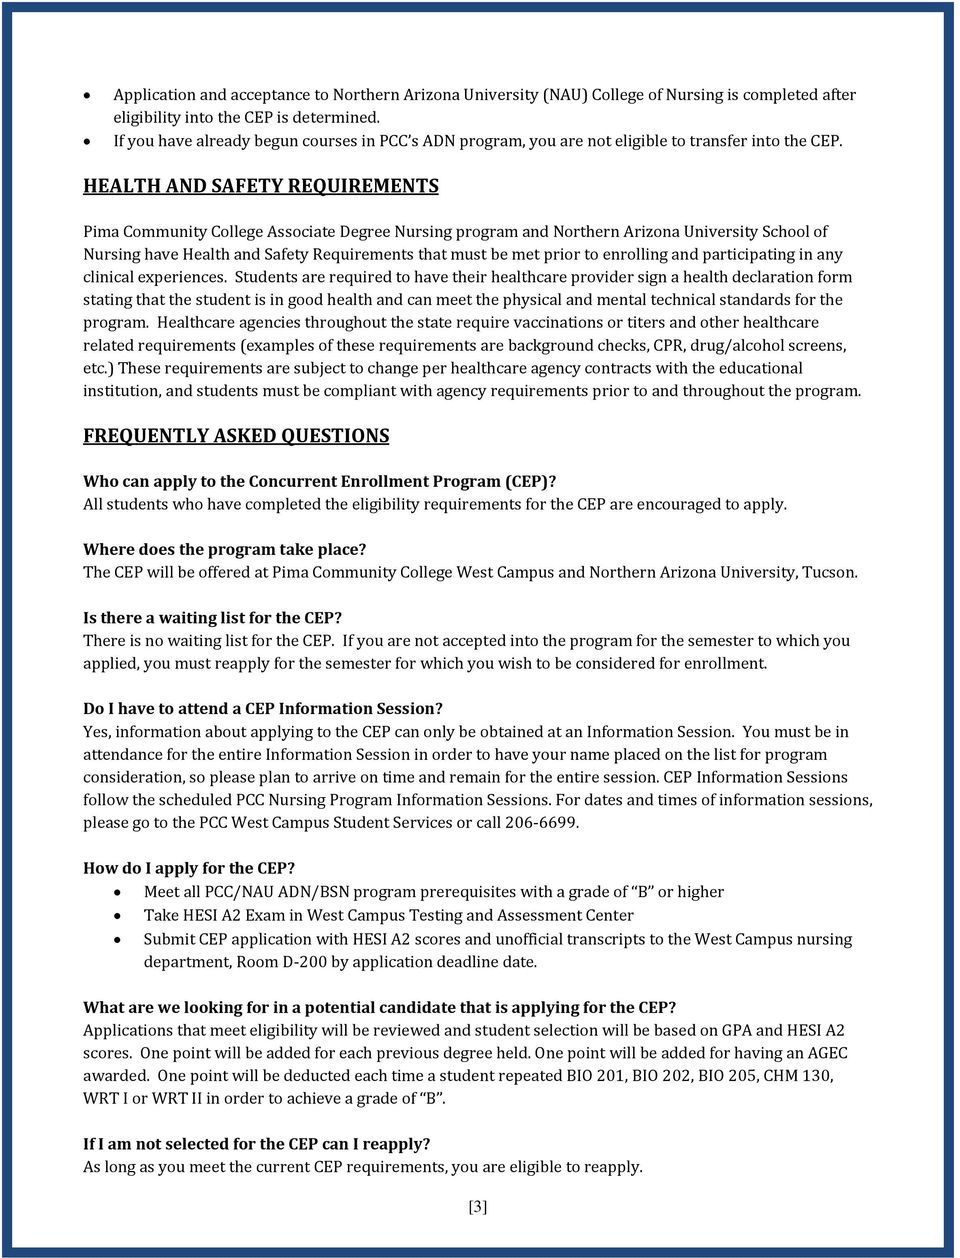 HEALTH AND SAFETY REQUIREMENTS Pima Community College Associate Degree Nursing program and Northern Arizona University School of Nursing have Health and Safety Requirements that must be met prior to